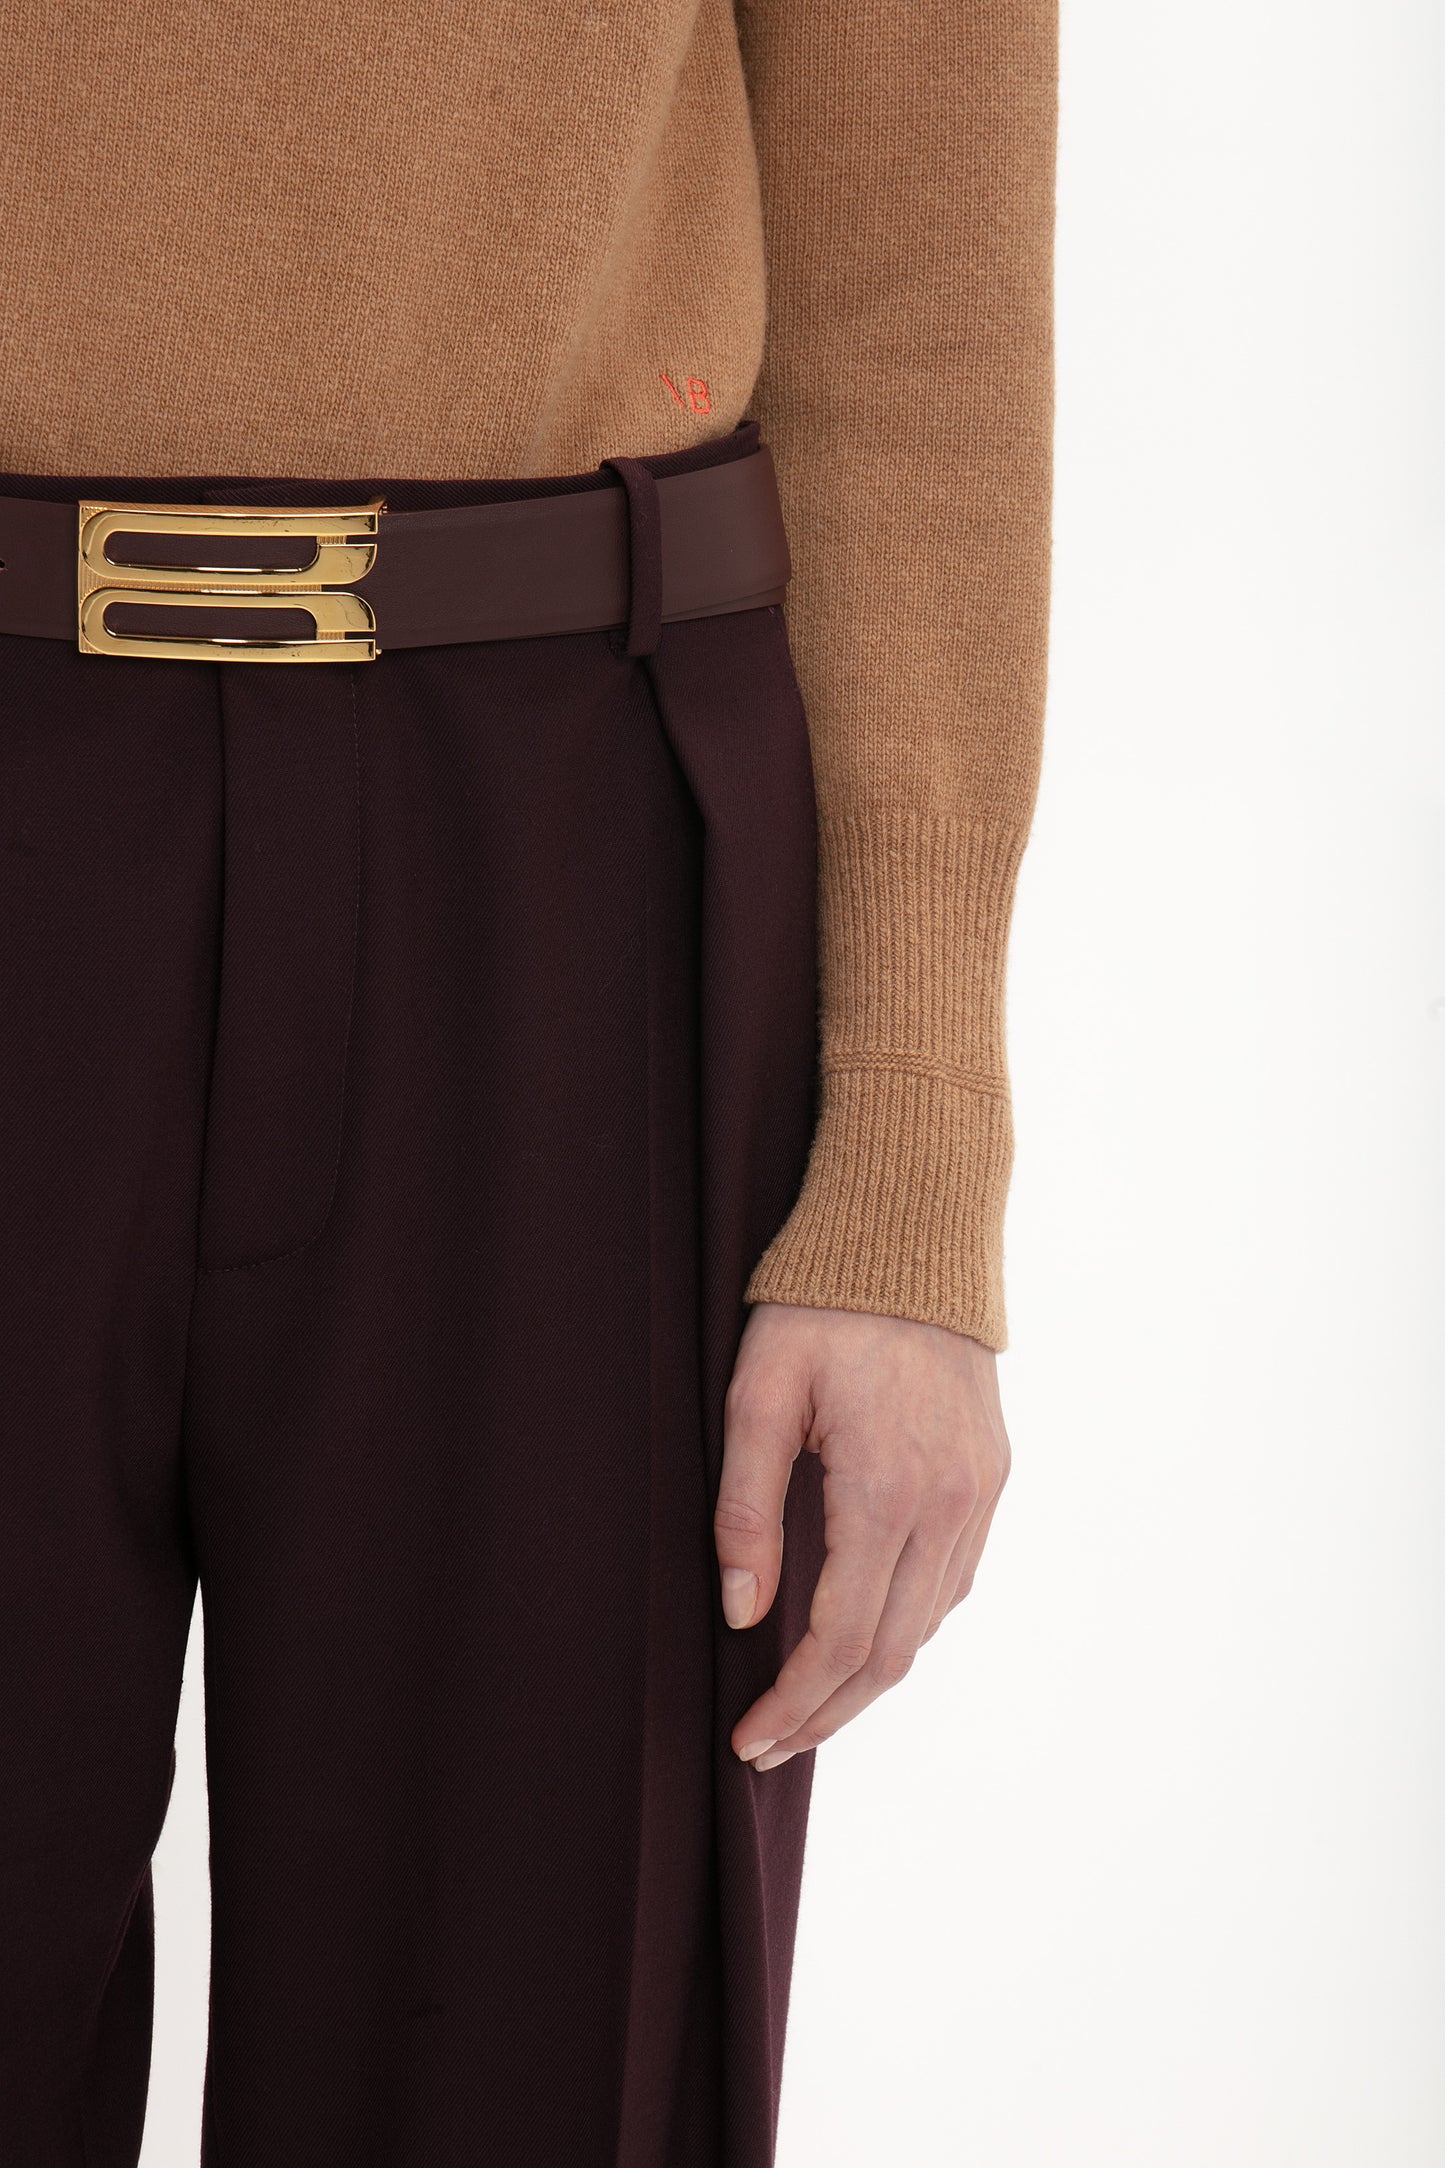 Close-up of a person wearing a lambswool Victoria Beckham polo neck jumper in tobacco and burgundy trousers with a gold buckle belt. Only the torso and hand are visible.